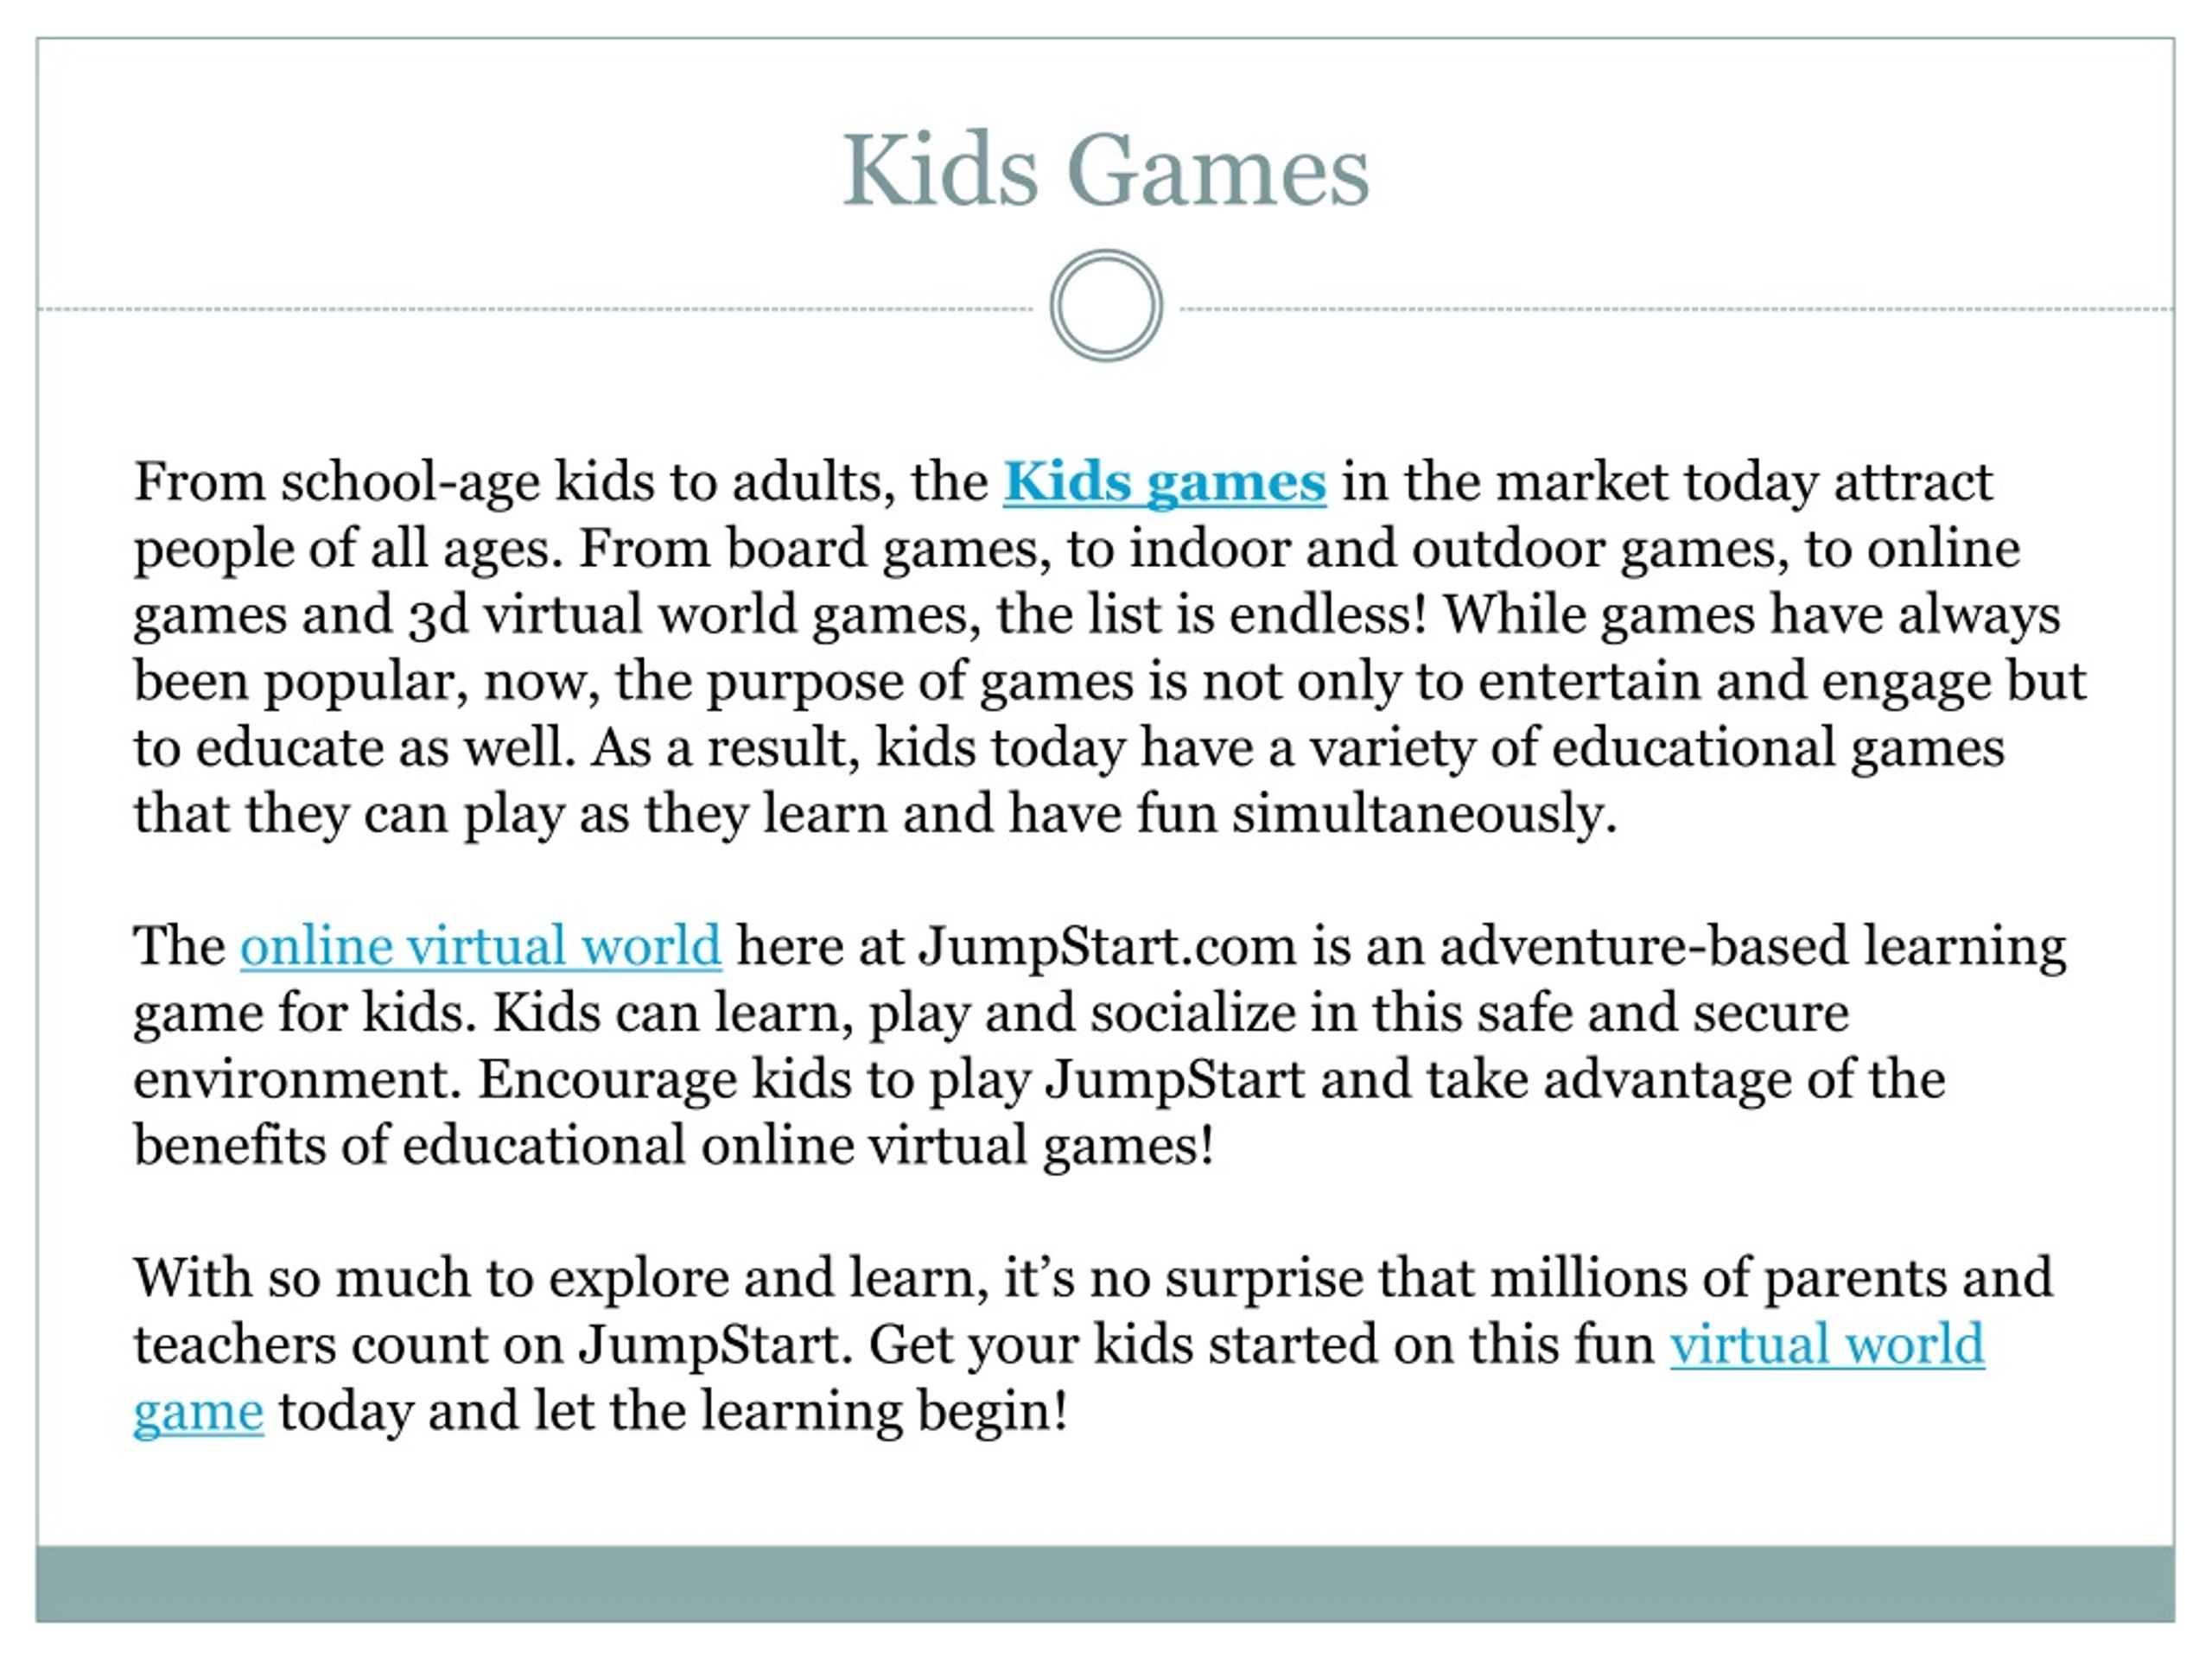 Educational Benefits of Online Games for Children and Adults